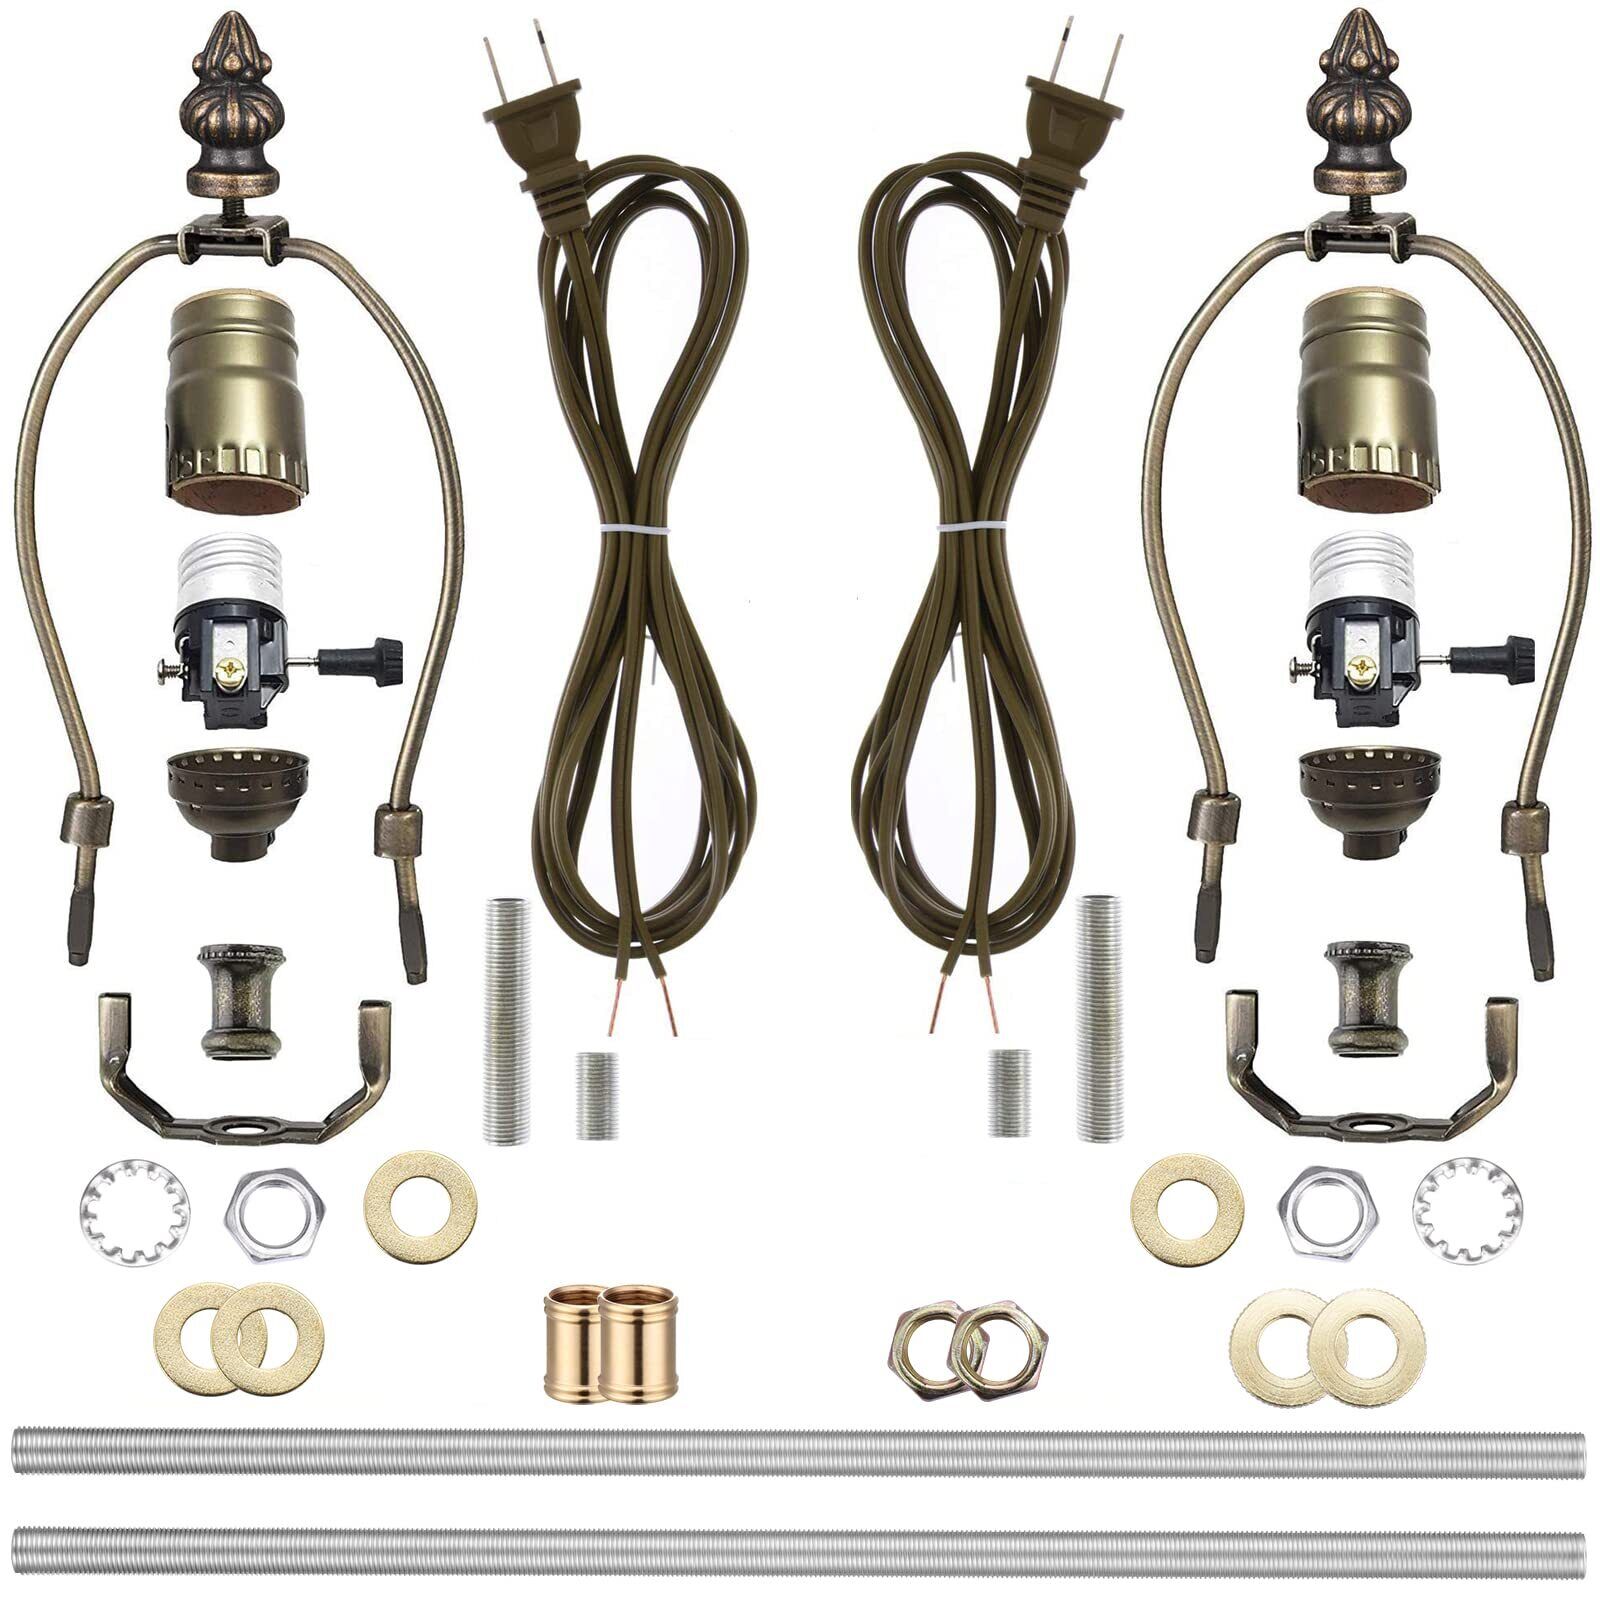 2 Sets Lamp Making Kit Lamp Wiring Kit with 8 Inch Harp, 2 Pieces 12\